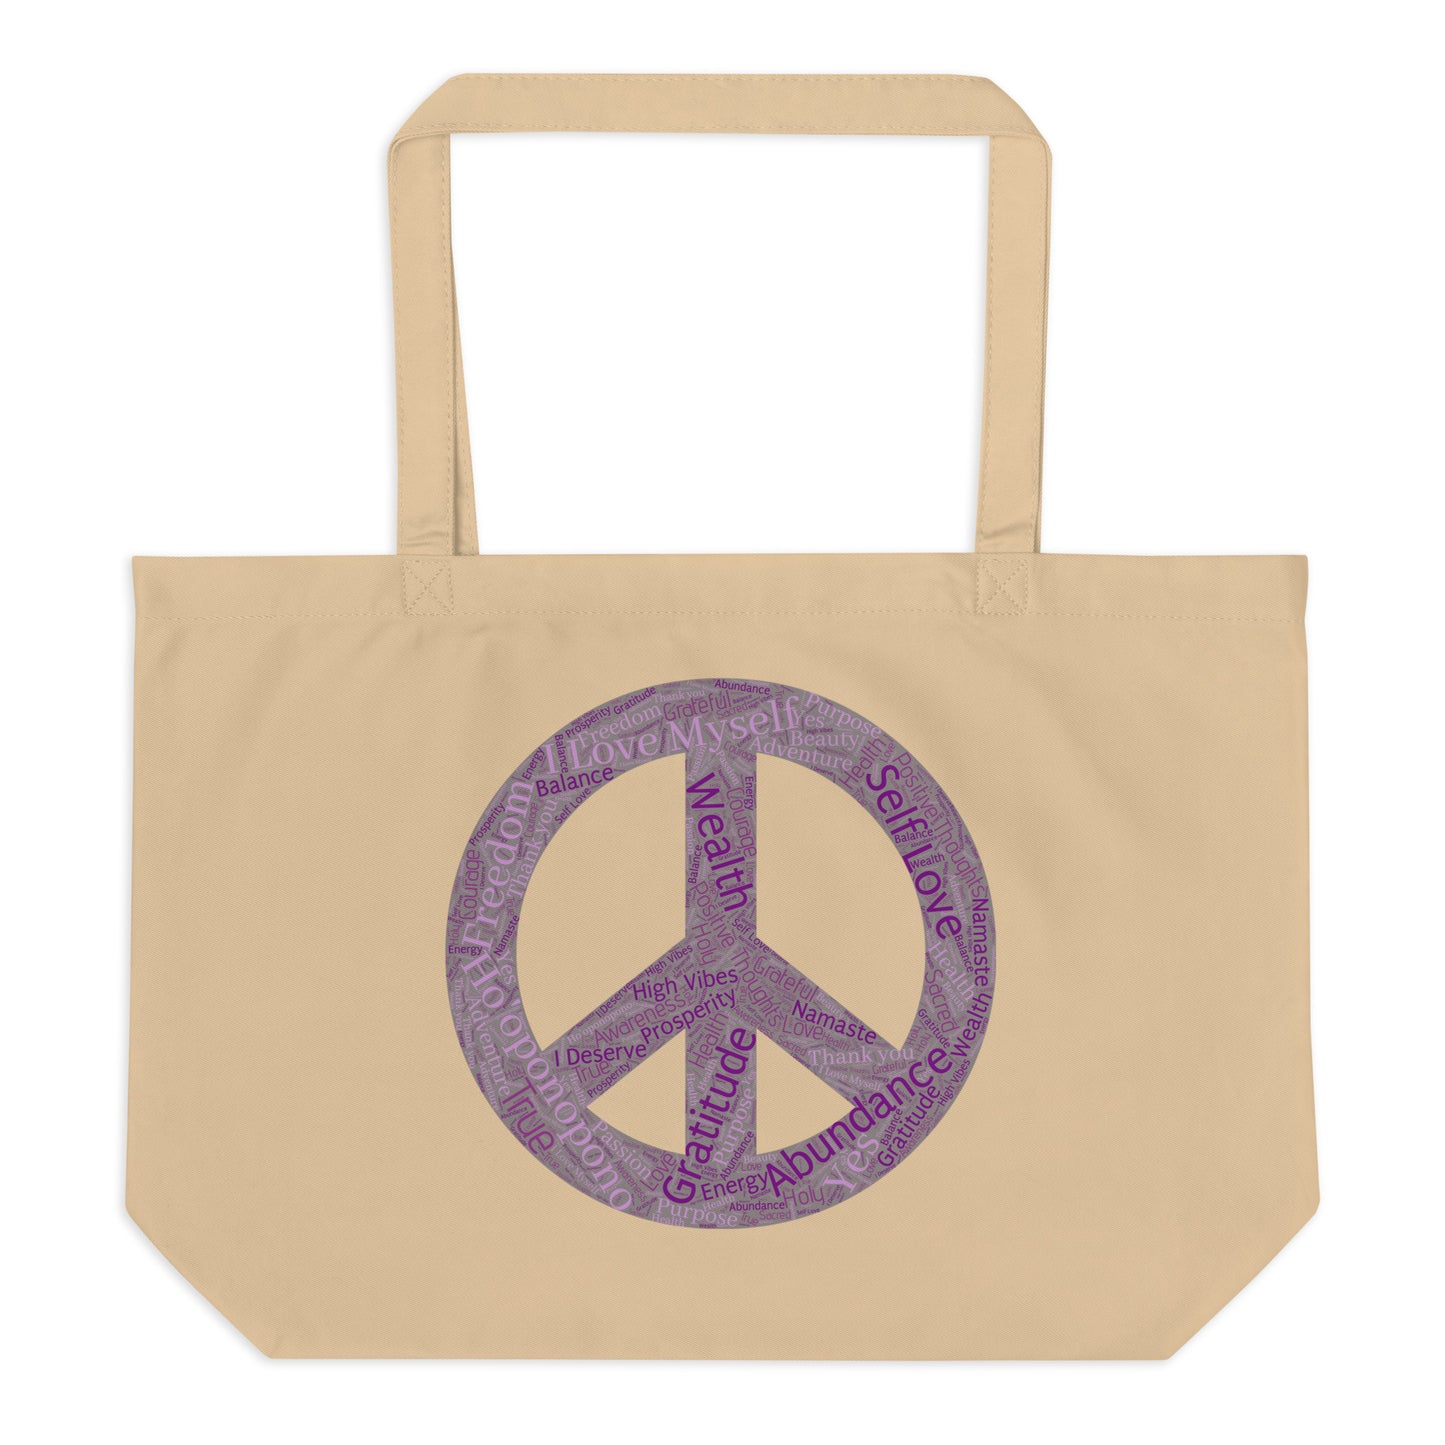 My Heart Intention Manifest Large organic tote bag